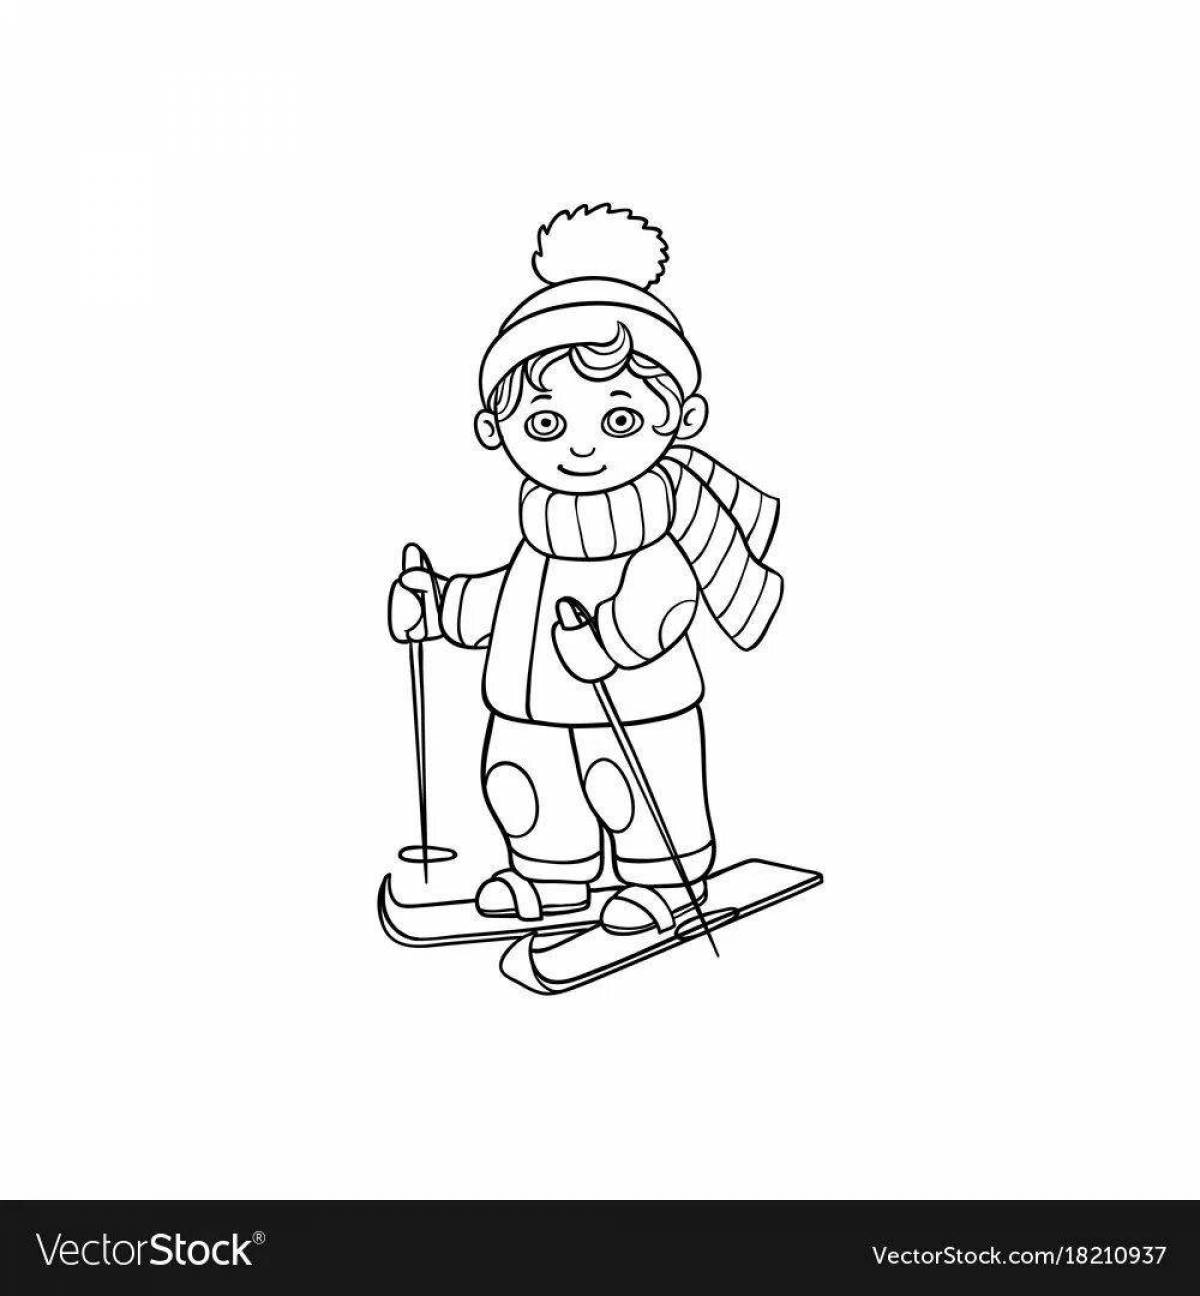 Coloring page funny baby skier